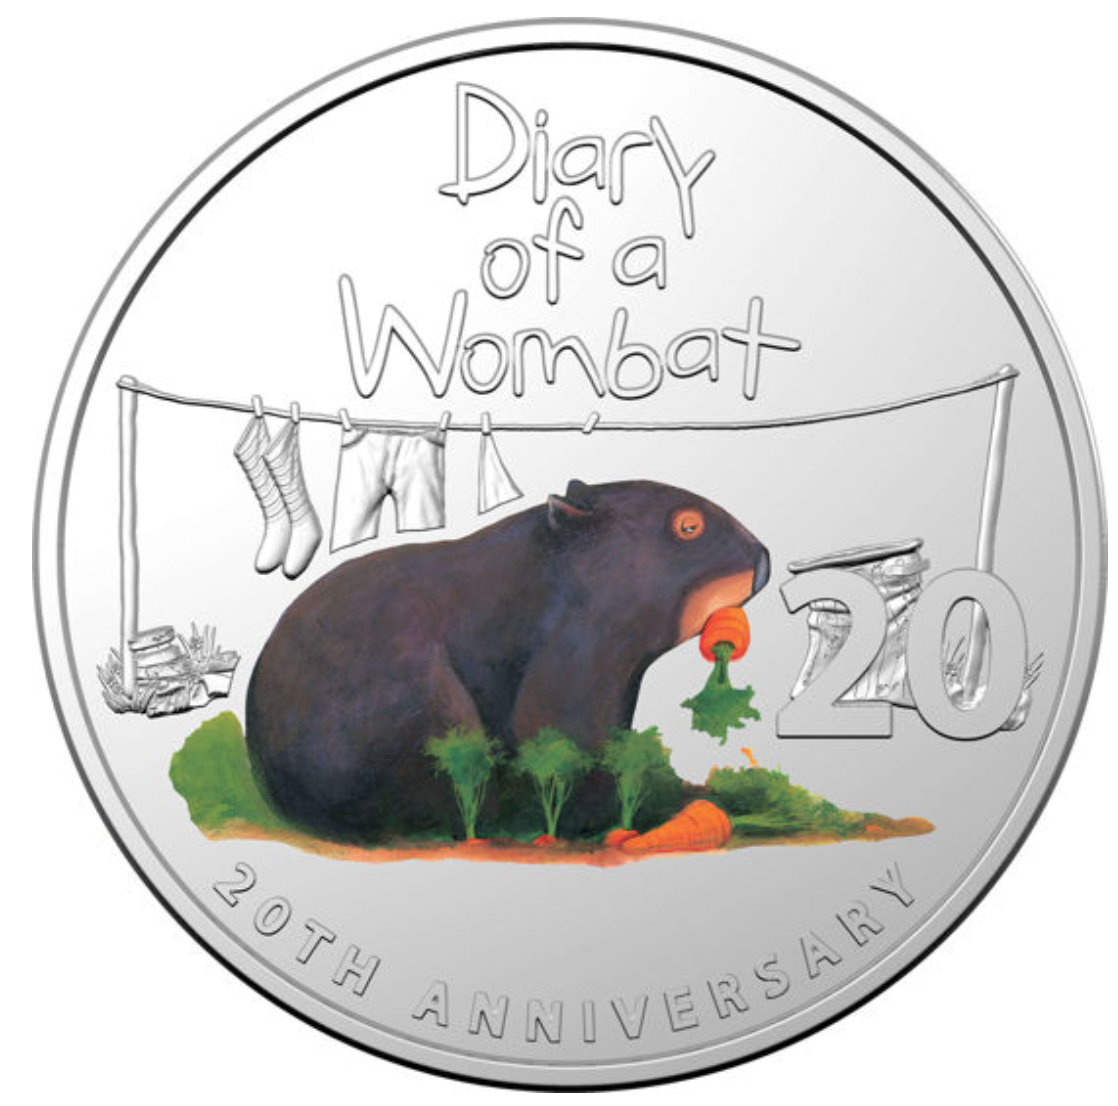 2022 20th anniversary of Diary of a Wombat - 20c Coloured Uncirculated with Special Edition Book